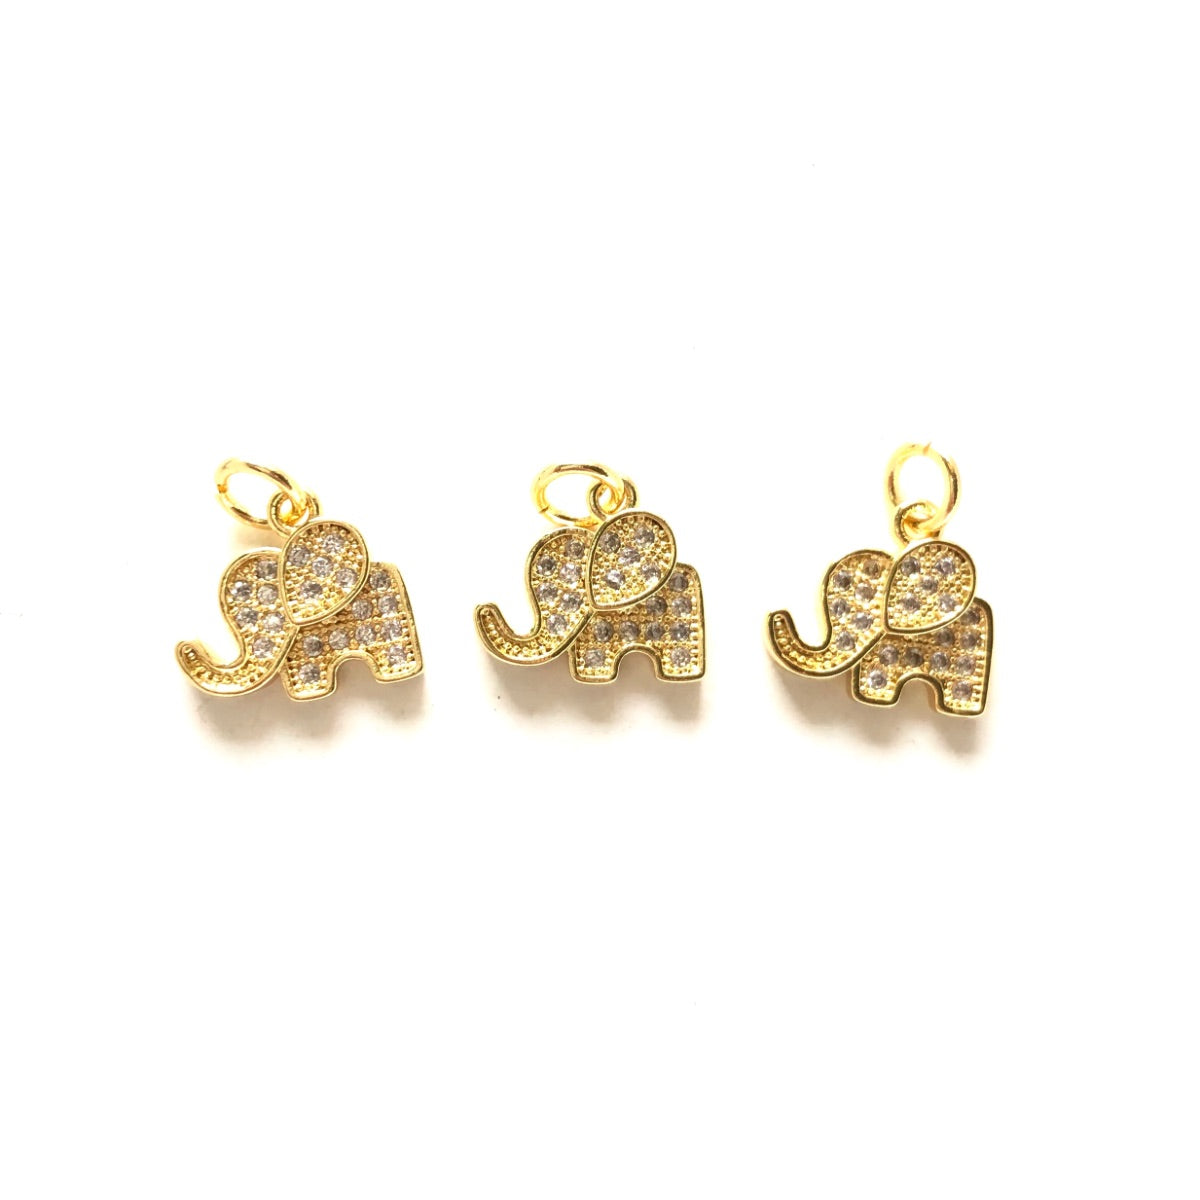 10pcs/lot 12*11mm Small Size CZ Pave Elephant Charms Gold CZ Paved Charms Animals & Insects Small Sizes Charms Beads Beyond